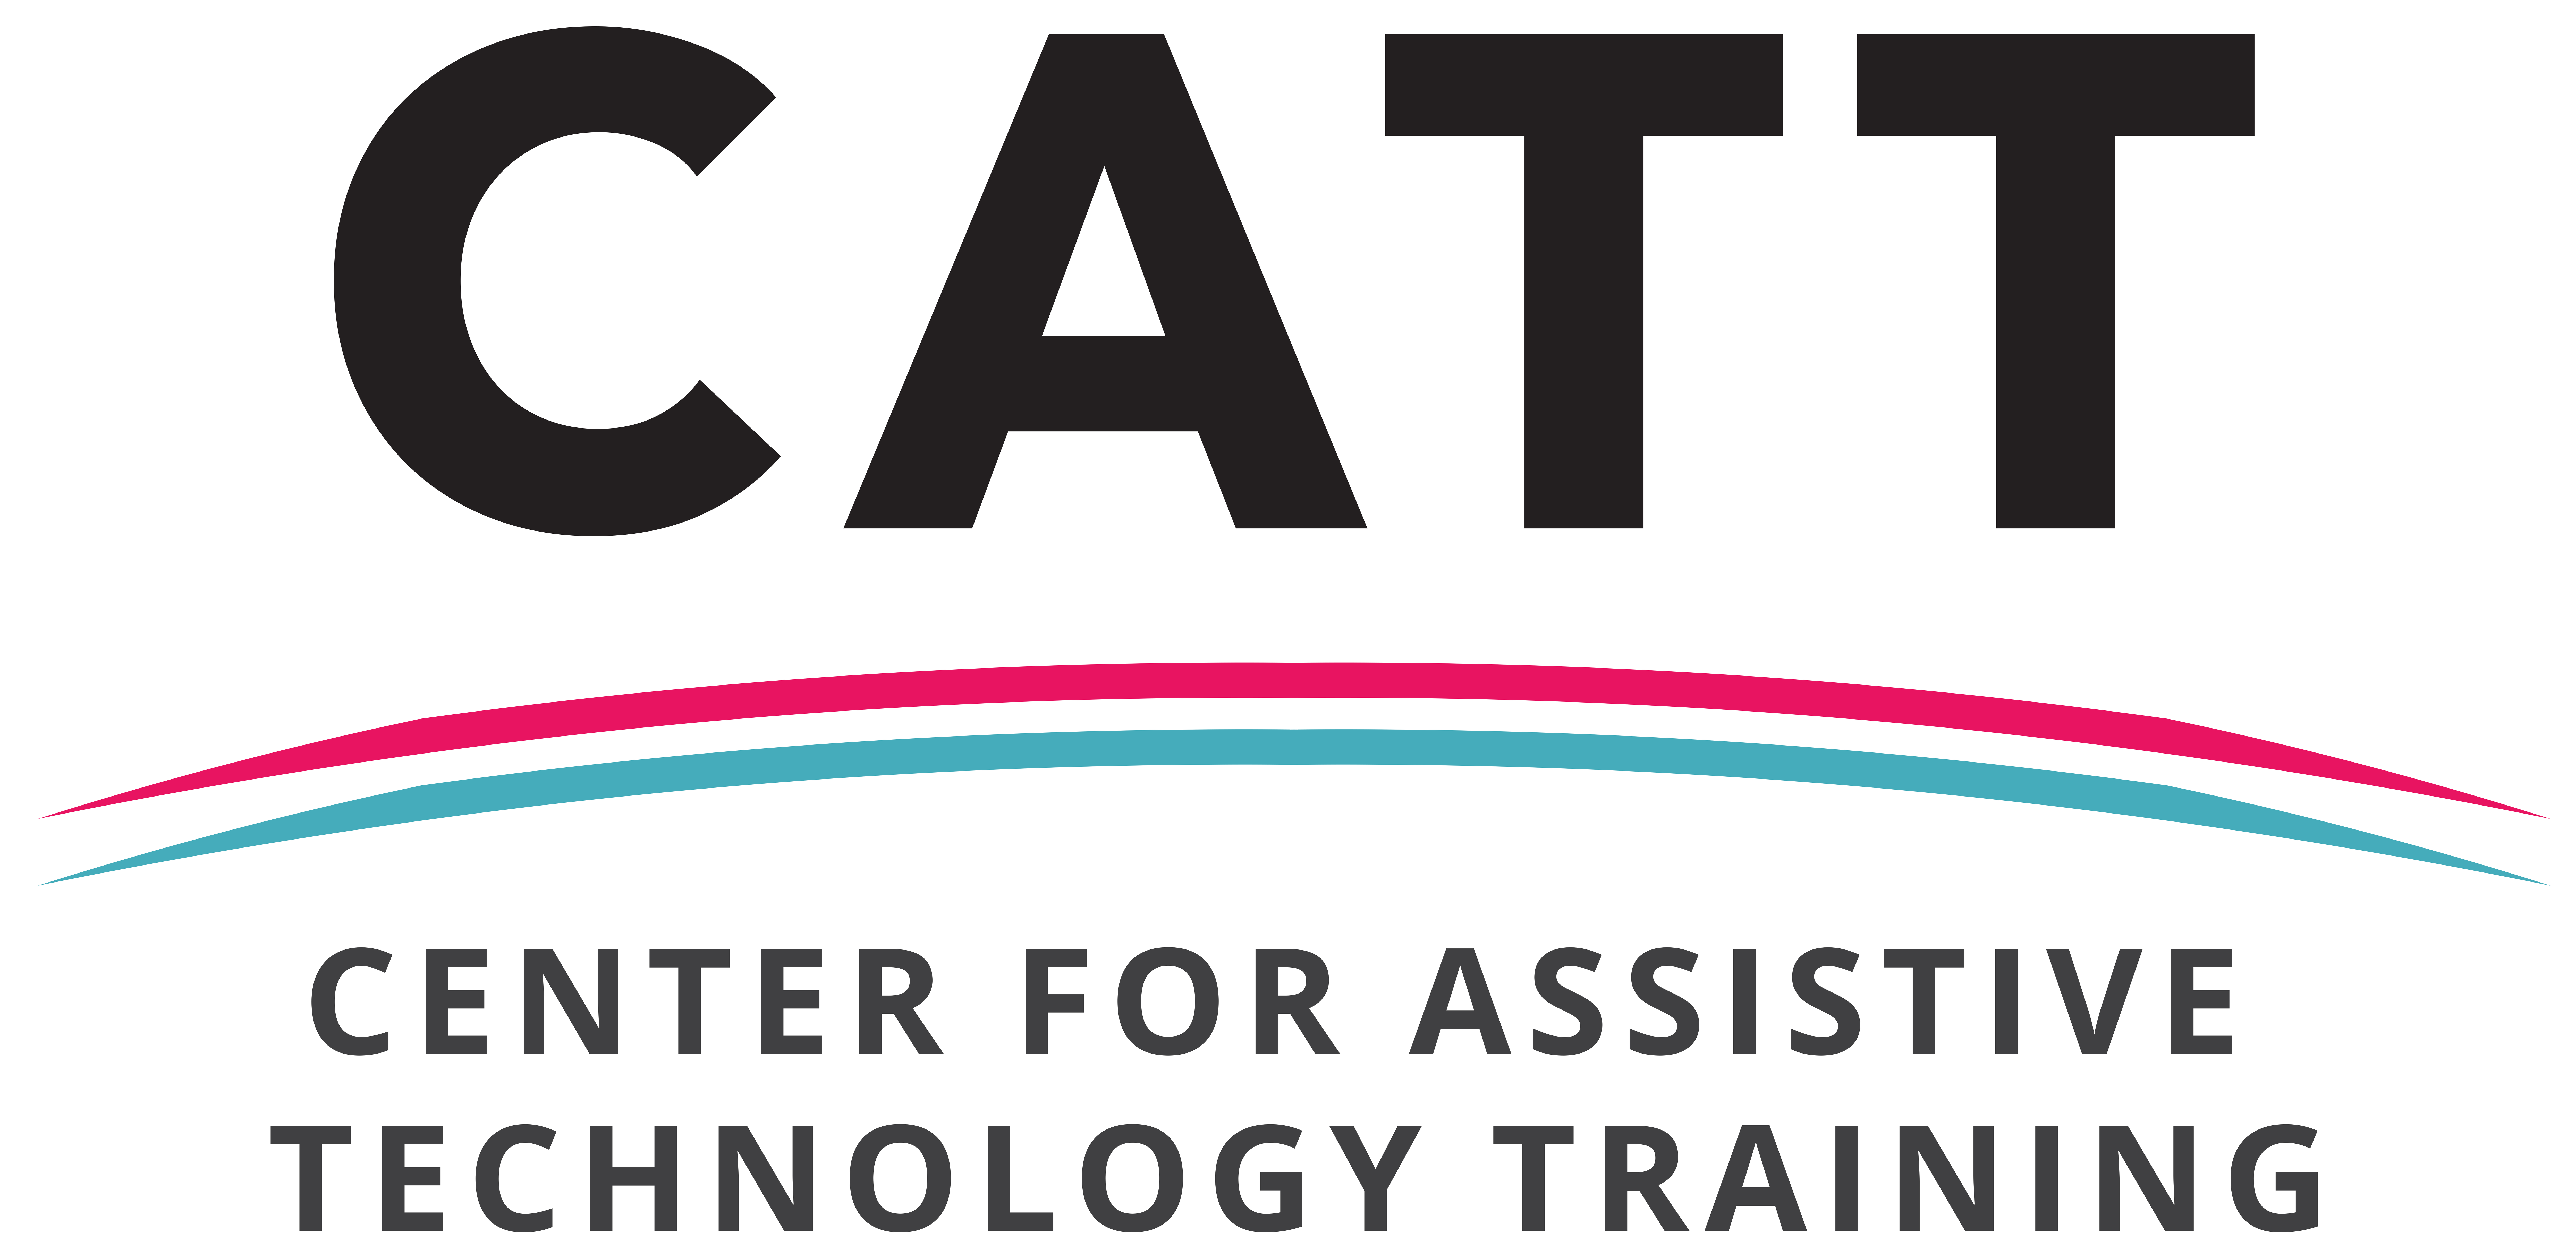 CATT Logo featuring CATT letter by lett in Bold face Text with a magenta and teal arcs underlining the letters and Center for Assistive Technology Training below.